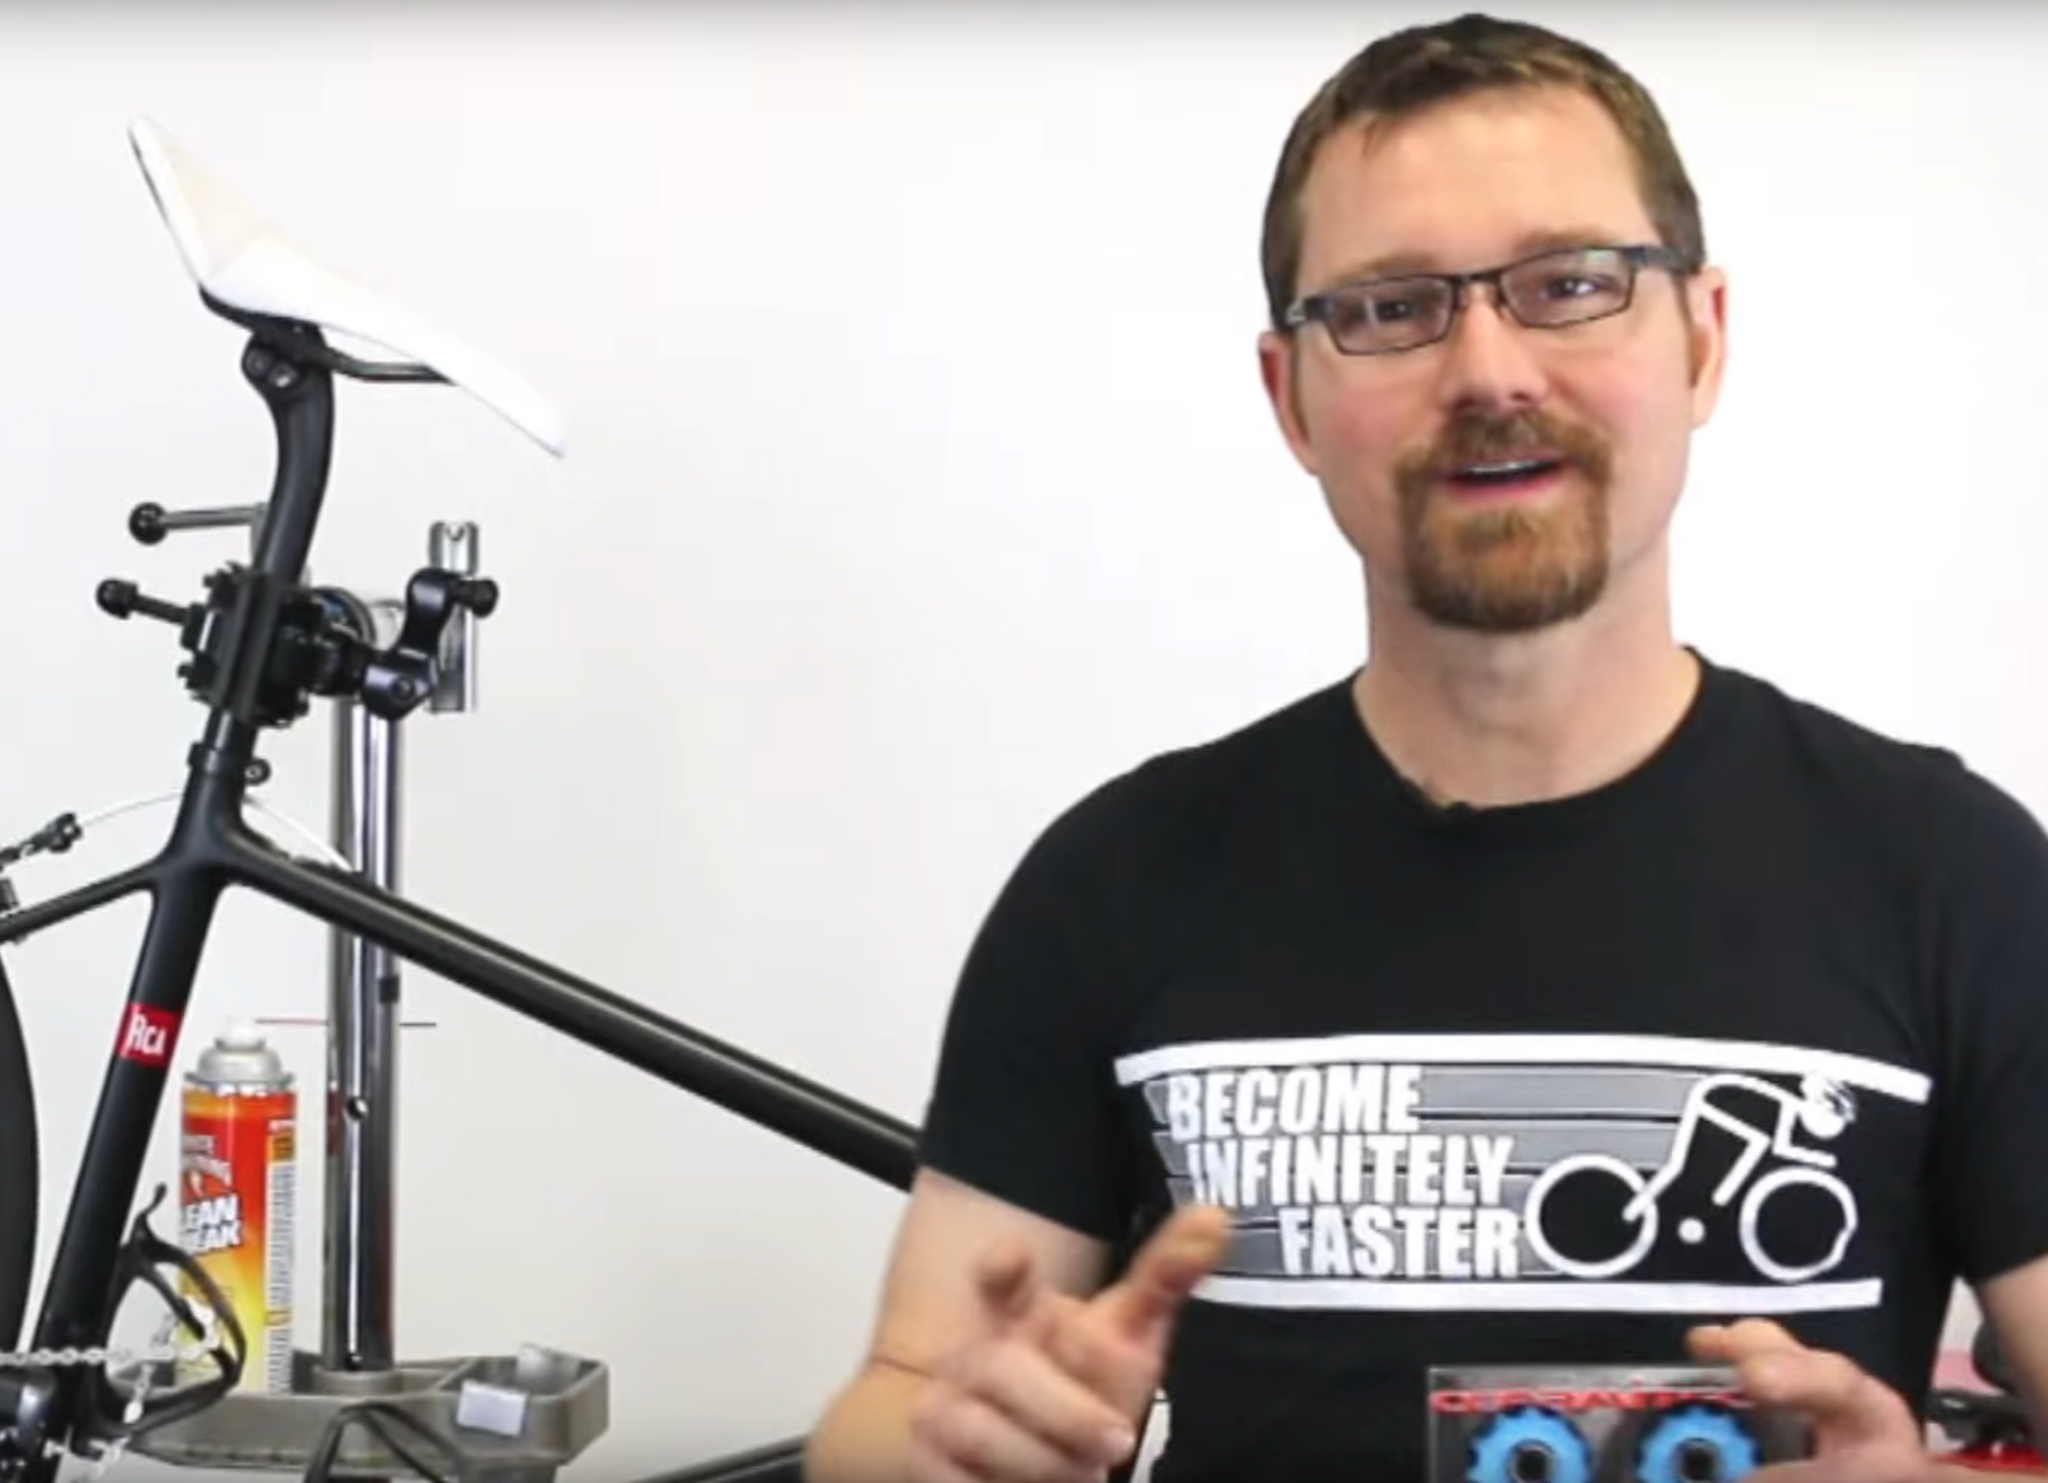 BBInfinite Shimano Ceramic Derailleur Pulley Demonstration and Install